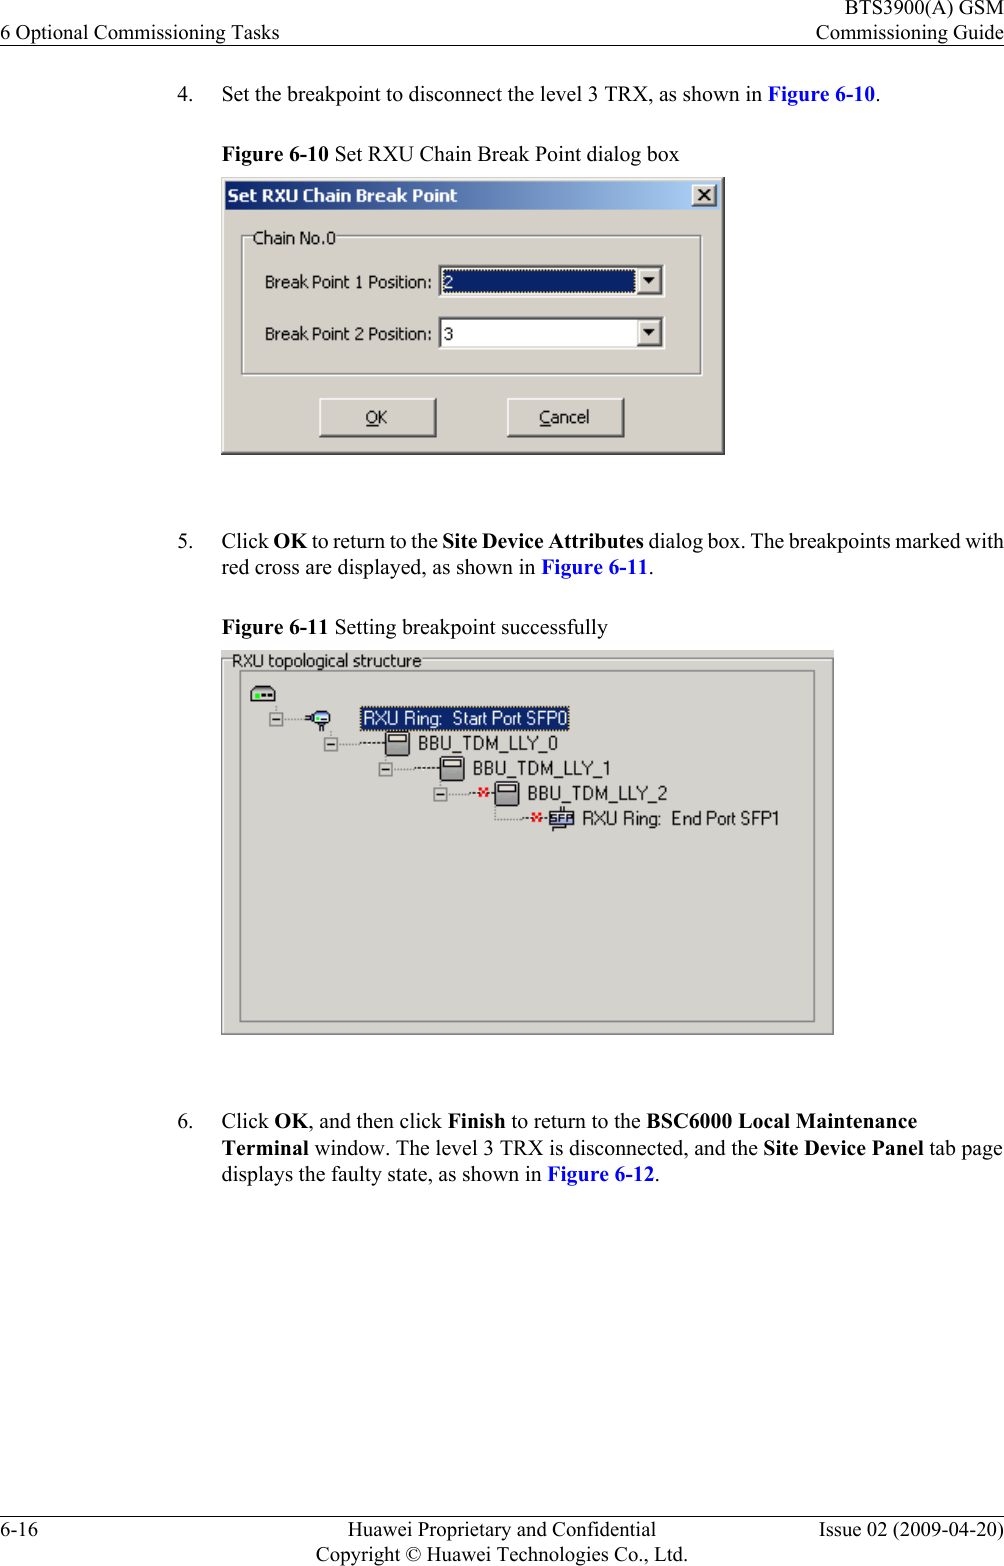 4. Set the breakpoint to disconnect the level 3 TRX, as shown in Figure 6-10.Figure 6-10 Set RXU Chain Break Point dialog box 5. Click OK to return to the Site Device Attributes dialog box. The breakpoints marked withred cross are displayed, as shown in Figure 6-11.Figure 6-11 Setting breakpoint successfully 6. Click OK, and then click Finish to return to the BSC6000 Local MaintenanceTerminal window. The level 3 TRX is disconnected, and the Site Device Panel tab pagedisplays the faulty state, as shown in Figure 6-12.6 Optional Commissioning TasksBTS3900(A) GSMCommissioning Guide6-16 Huawei Proprietary and ConfidentialCopyright © Huawei Technologies Co., Ltd.Issue 02 (2009-04-20)